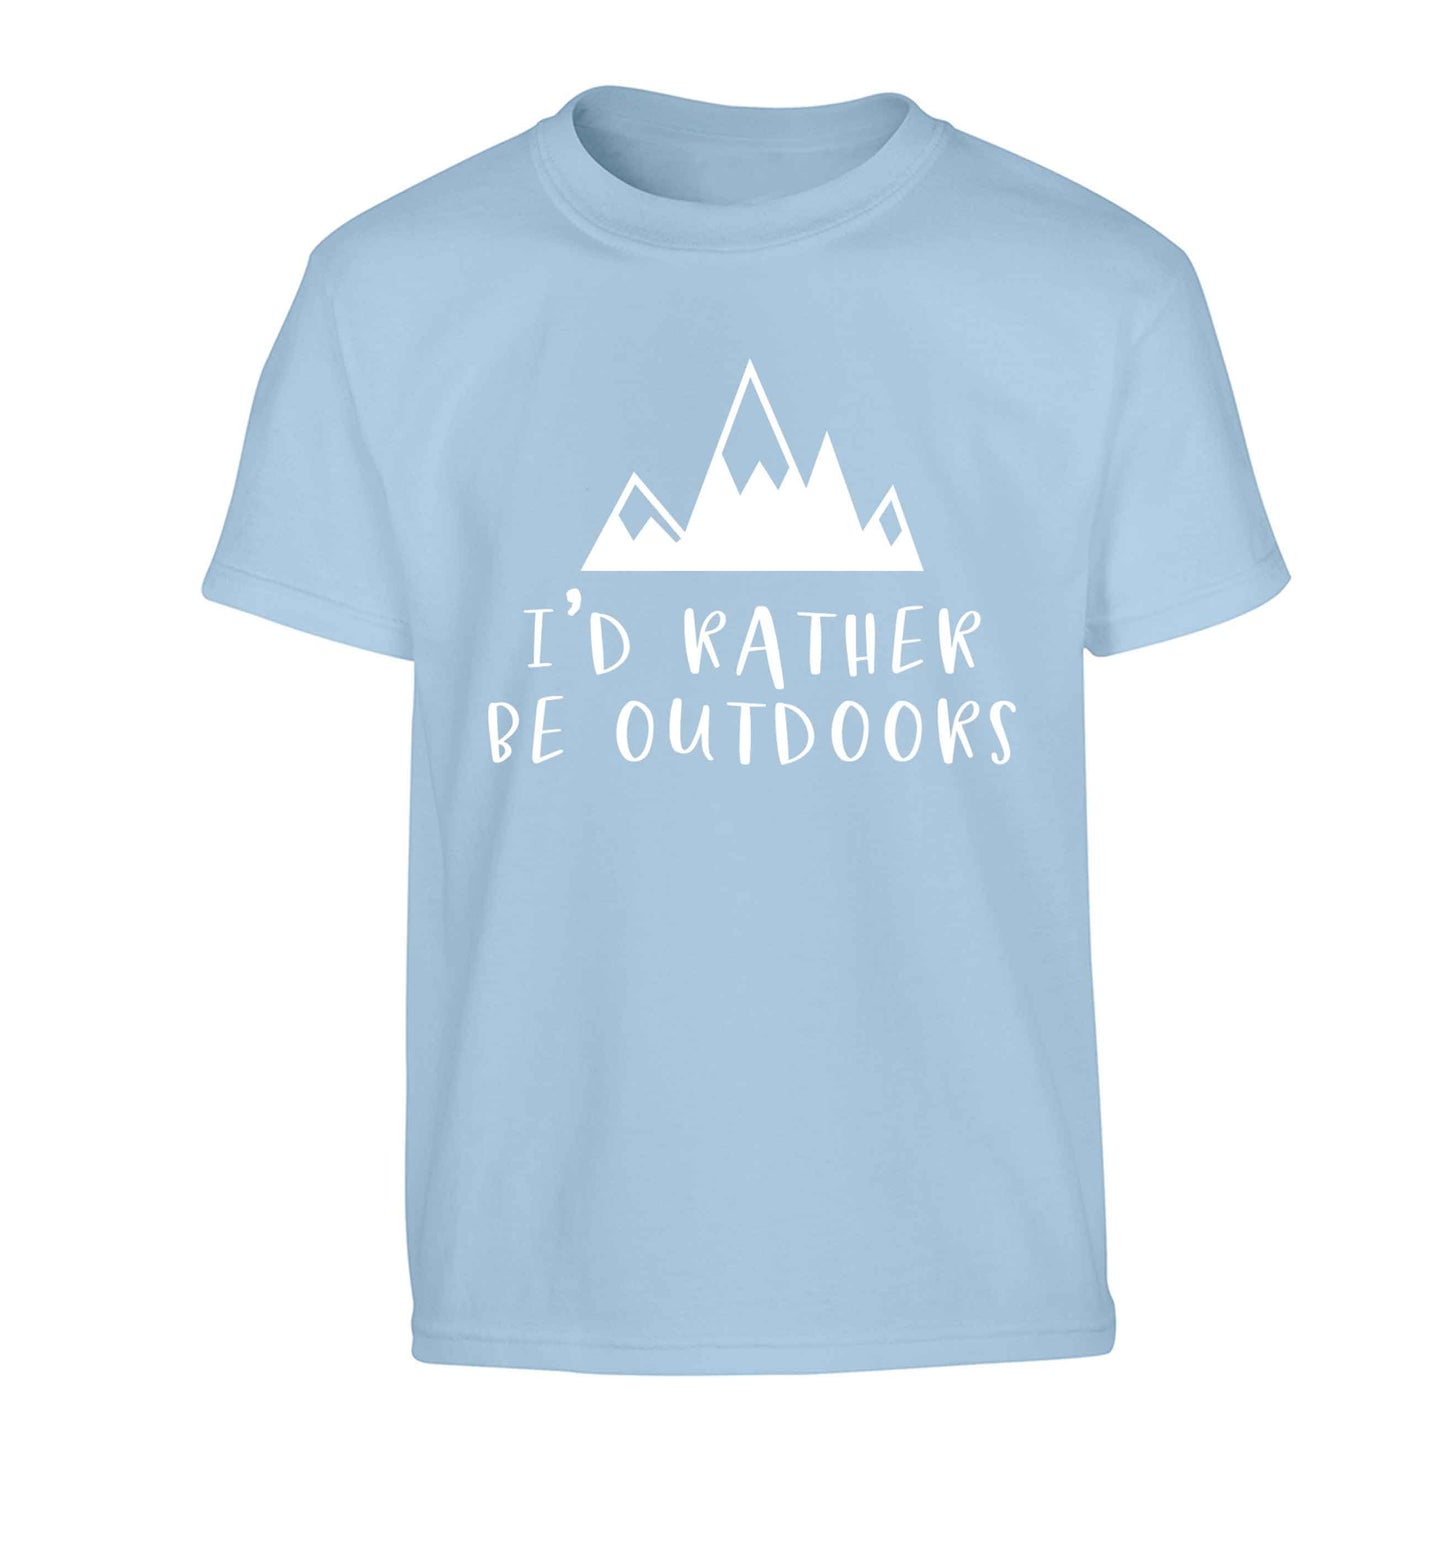 I'd rather be outdoors Children's light blue Tshirt 12-13 Years